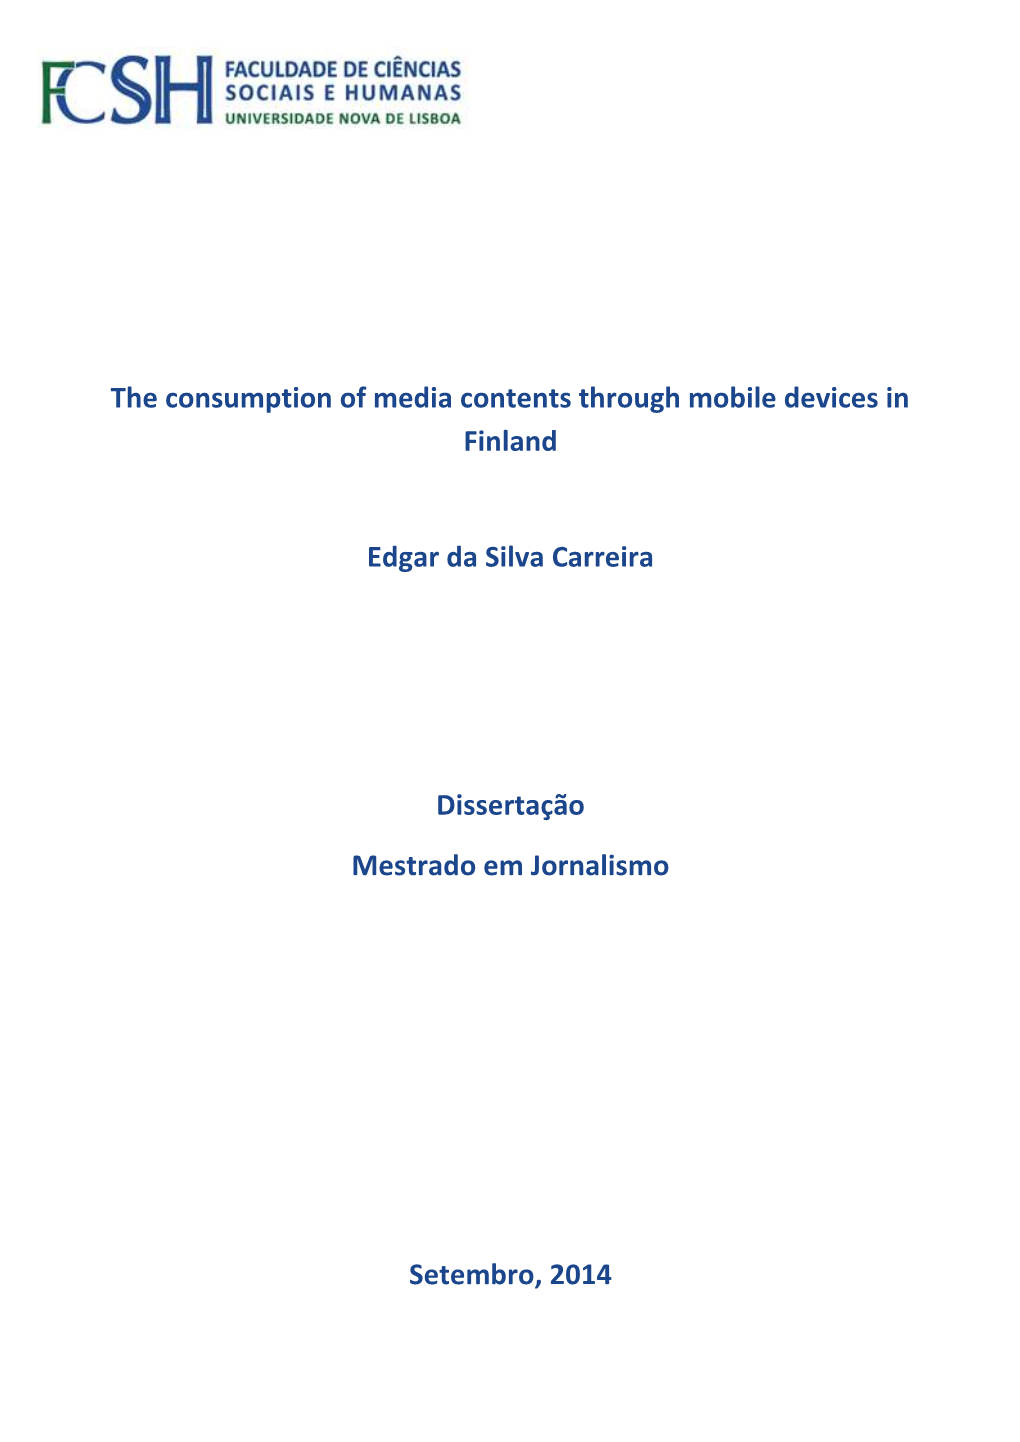 The Consumption of Media Contents Through Mobile Devices in Finland